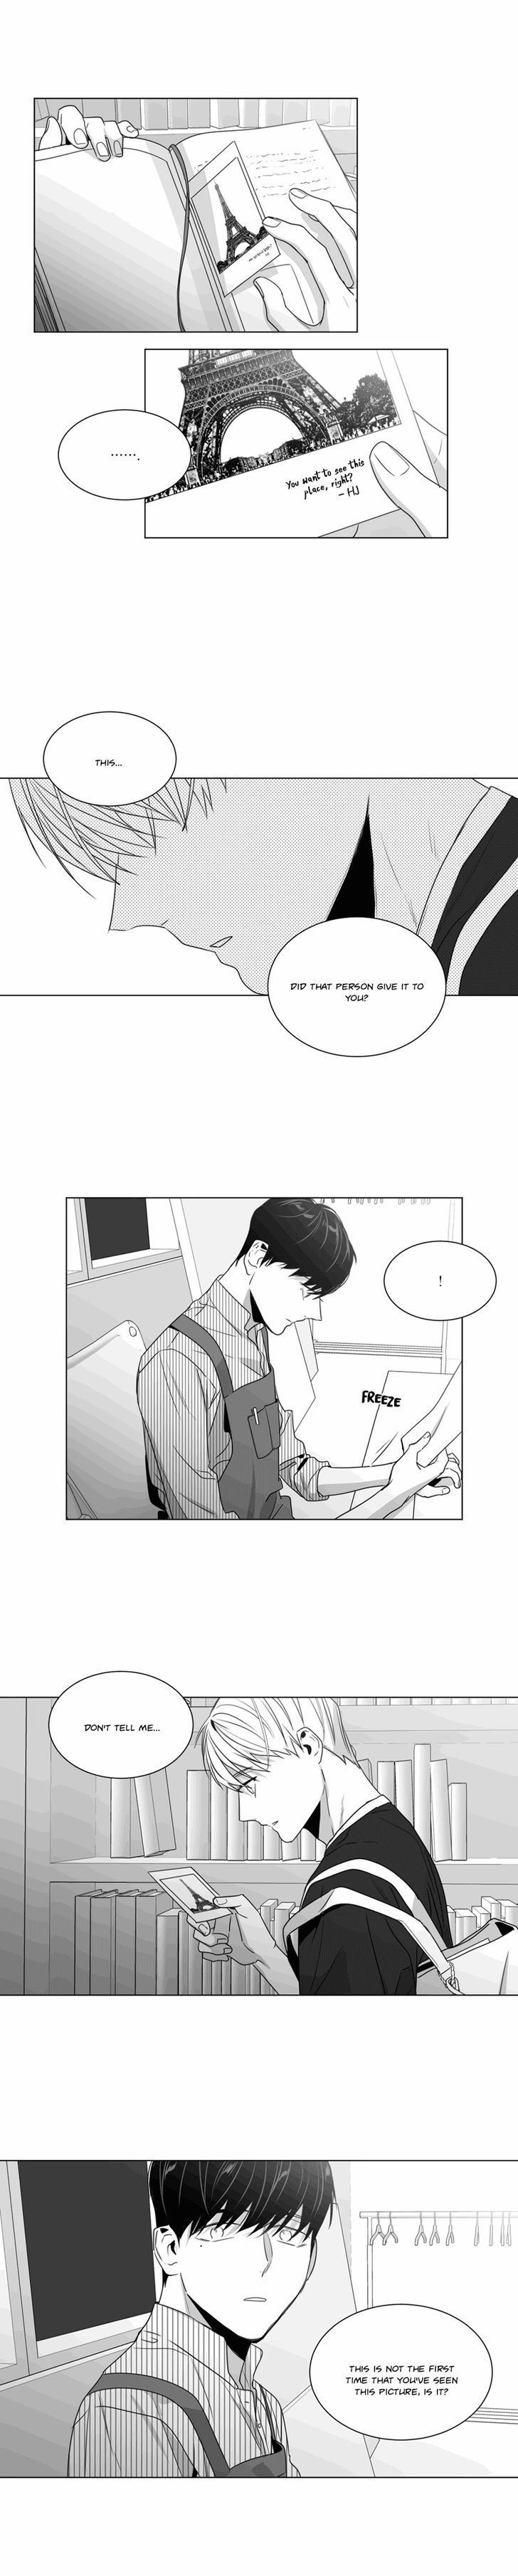 Lover Boy (Lezhin) Chapter 036 page 13